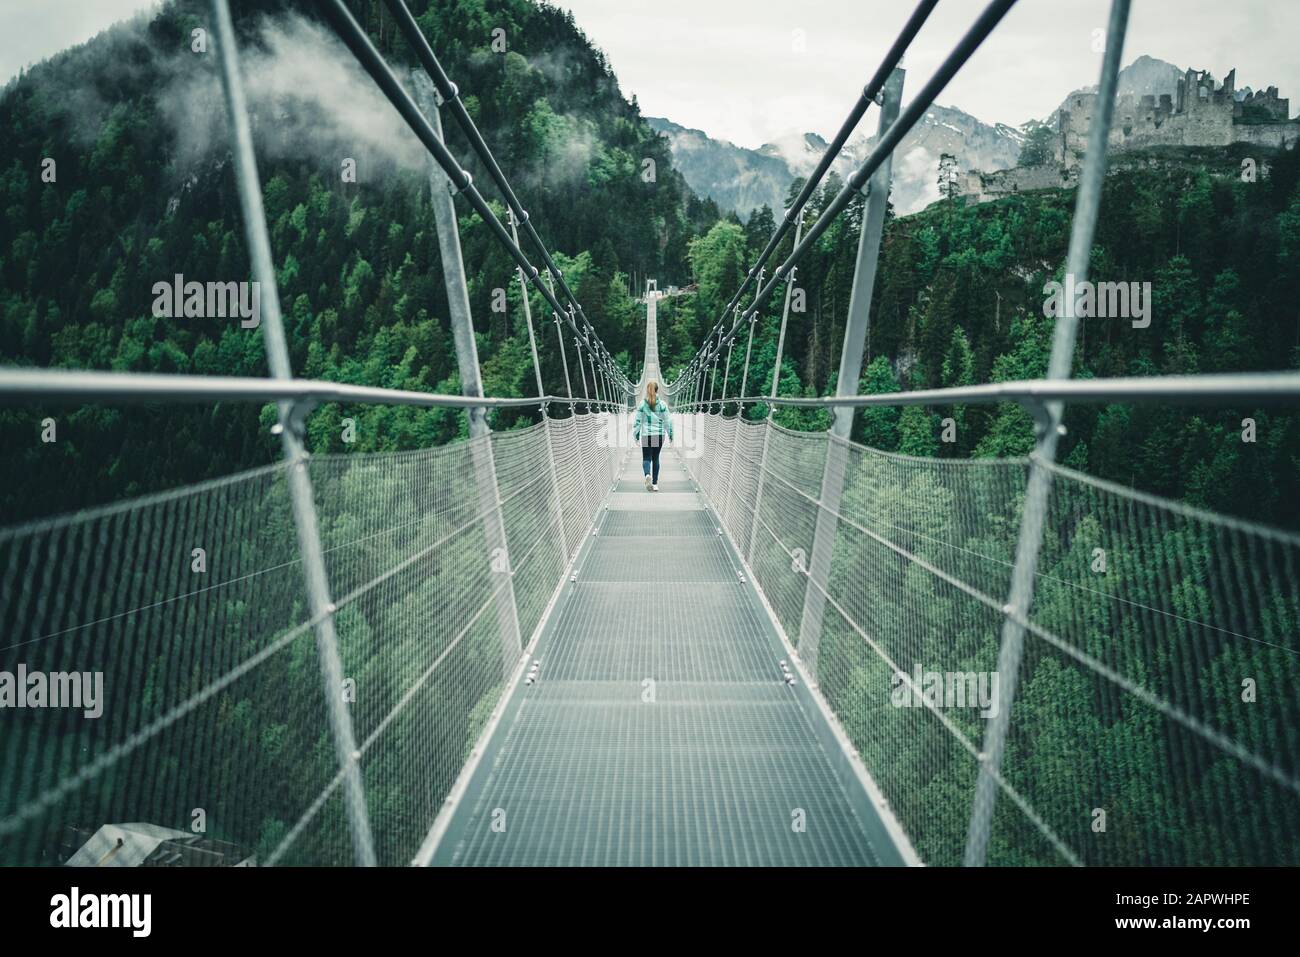 Young female hiking over suspension rope bridge in alpine environment Stock Photo